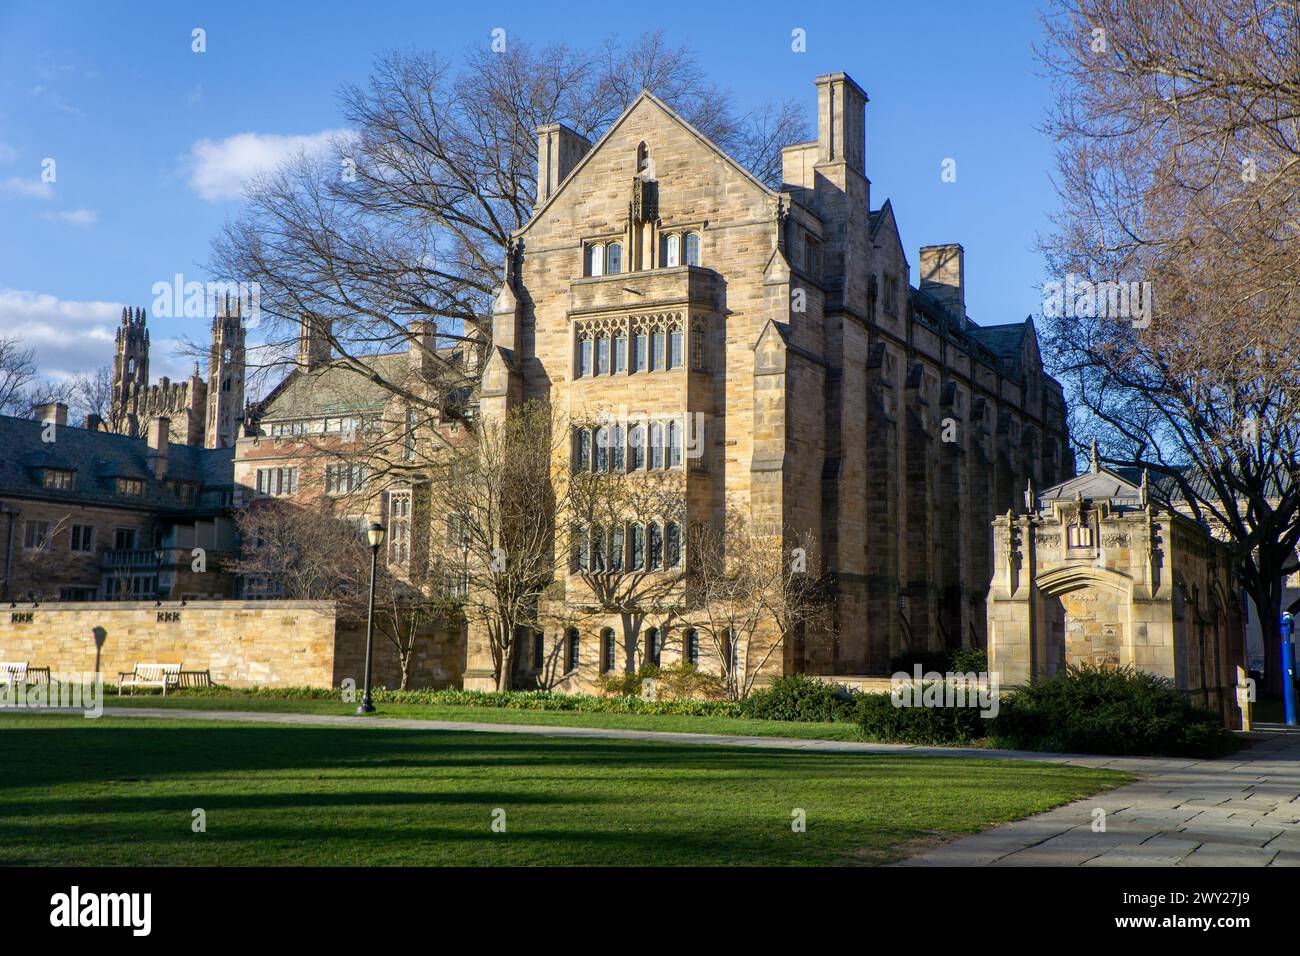 Anne T. & Robert M. Bass Library, exterior view, Yale University, New Haven, Connecticut, USA Stock Photo